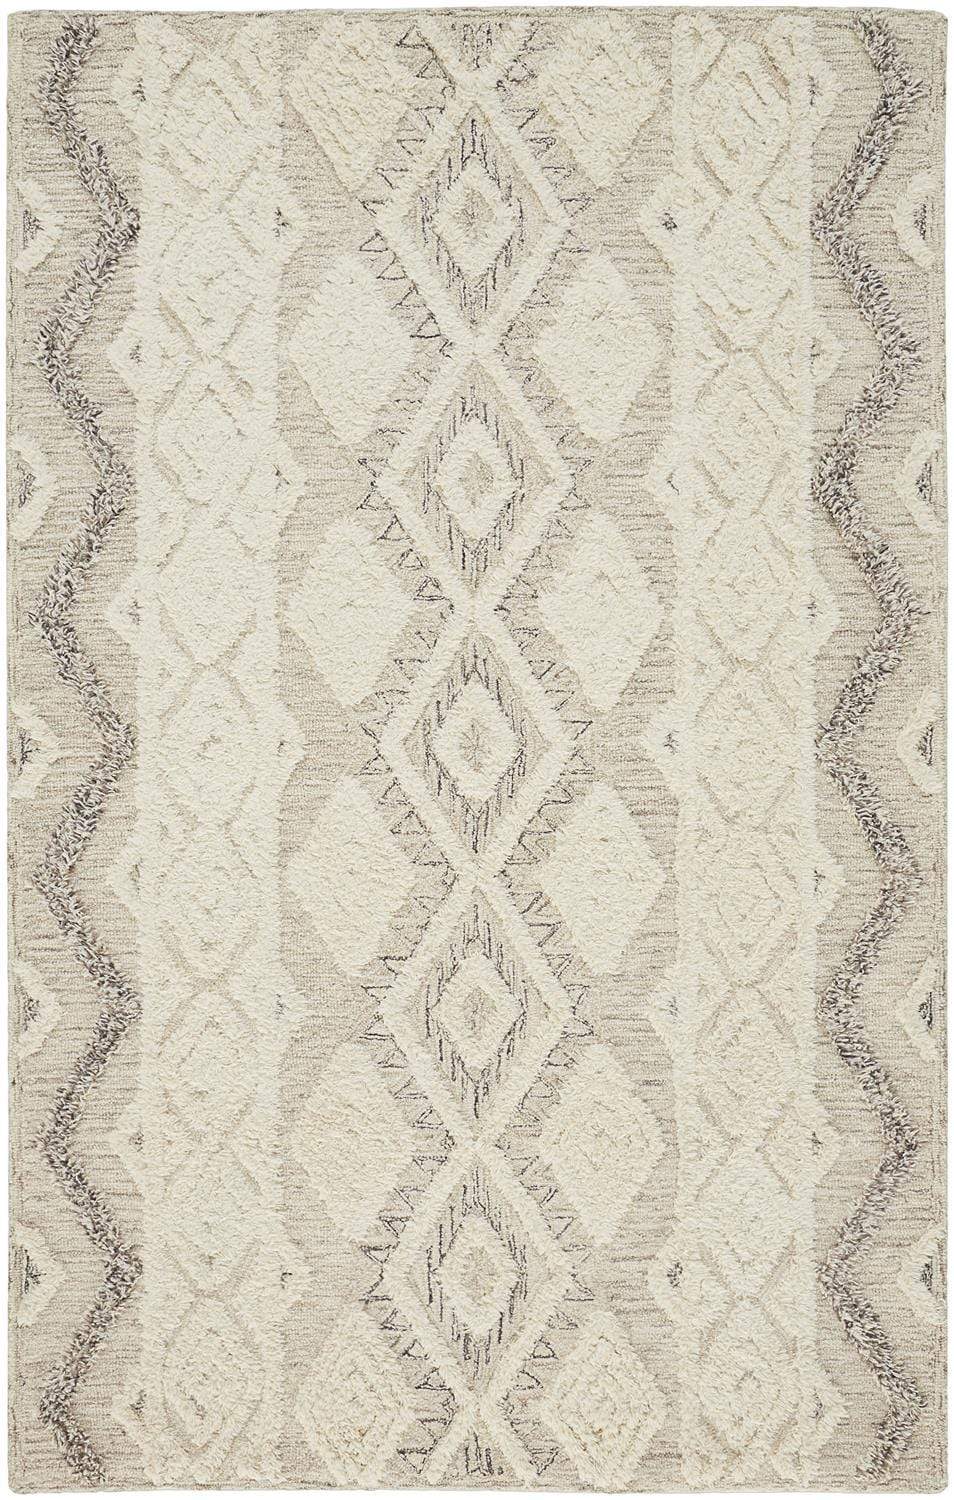 Feizy Feizy Anica Premium Wool Tufted Moroccan Style Rug - Ivory & Gray - Available in 6 Sizes 4' x 6' ANC8006FGRY000C00